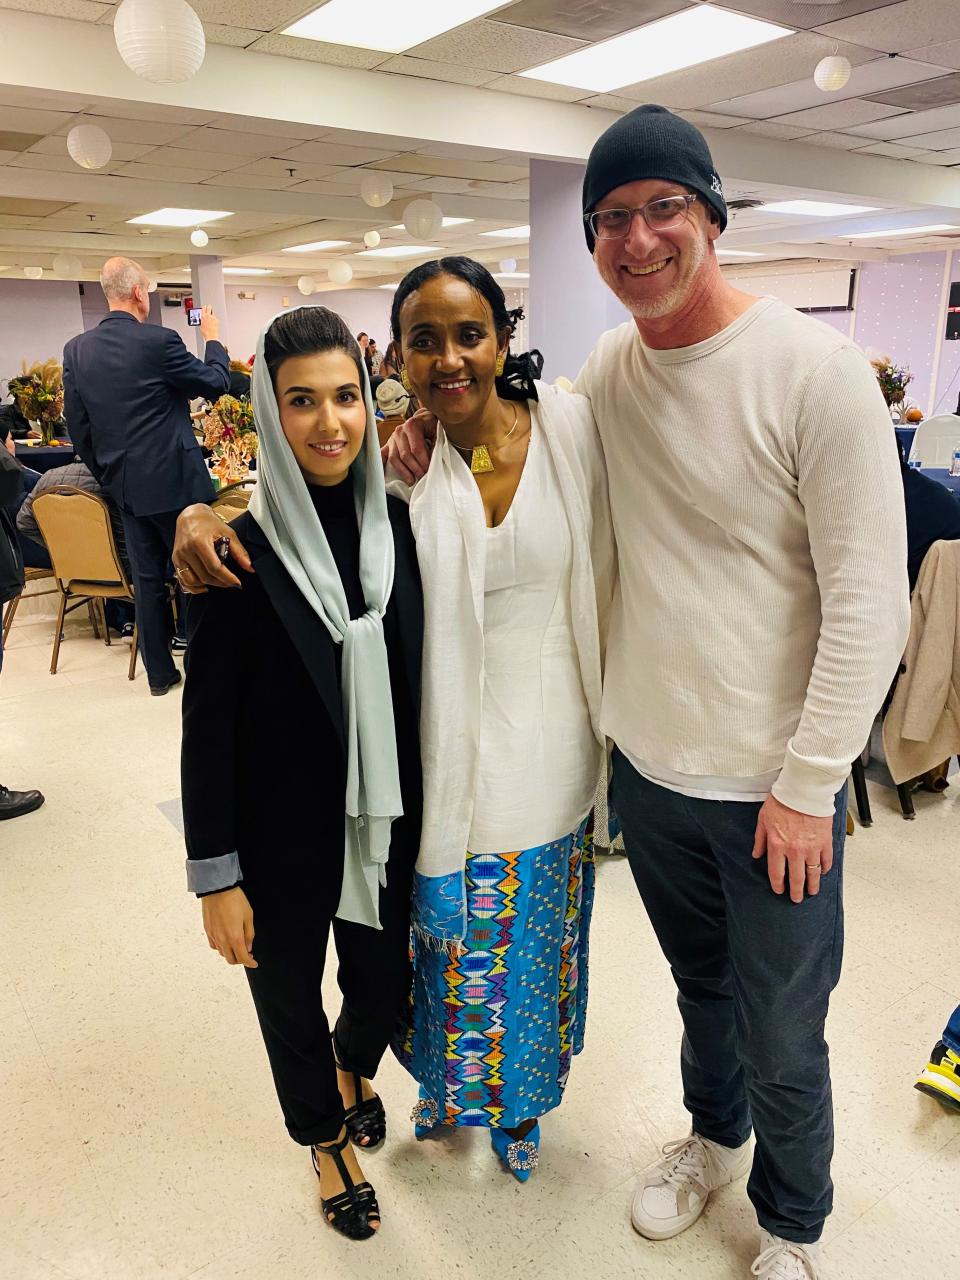 At the Ethiopian Community Development Council's Thanksgiving party on Nov. 20, 2022, in Arlington, Va., from left, refugee case manager Manizha Nuzhat, Executive Director Sarah Zullo and housing coordinator Bob Elston.